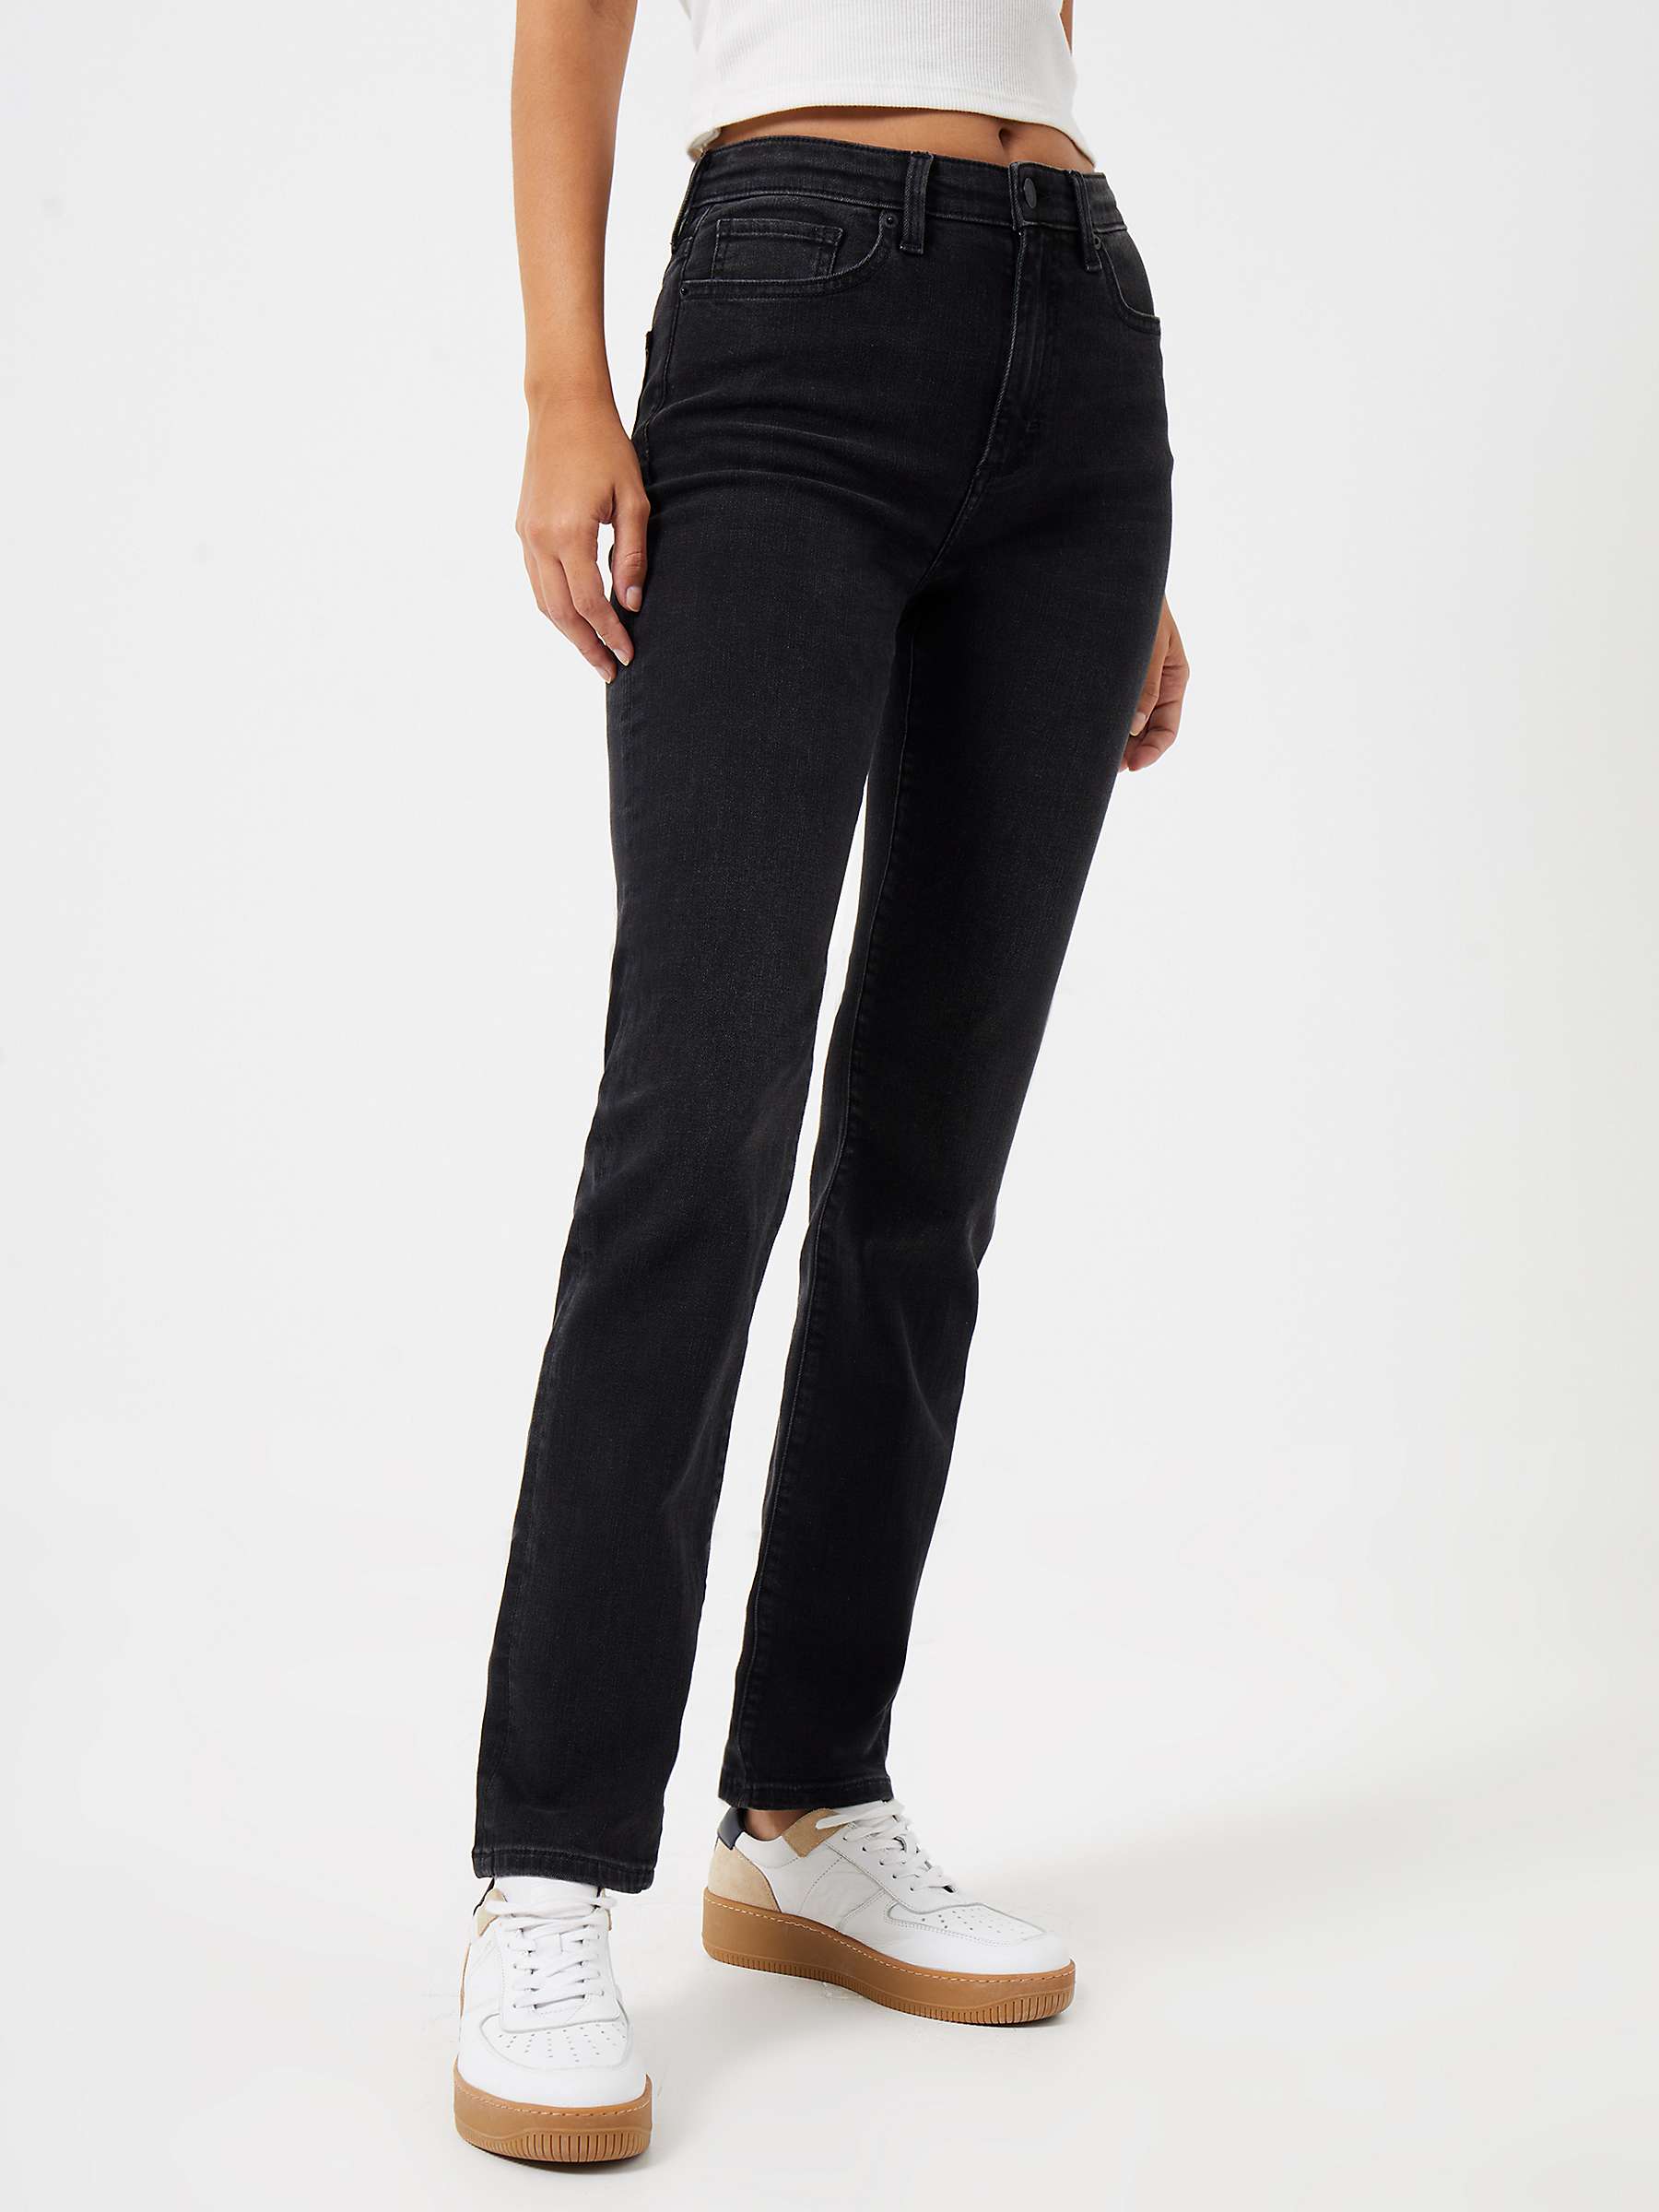 Buy French Connection Stretch Slim Jeans Online at johnlewis.com